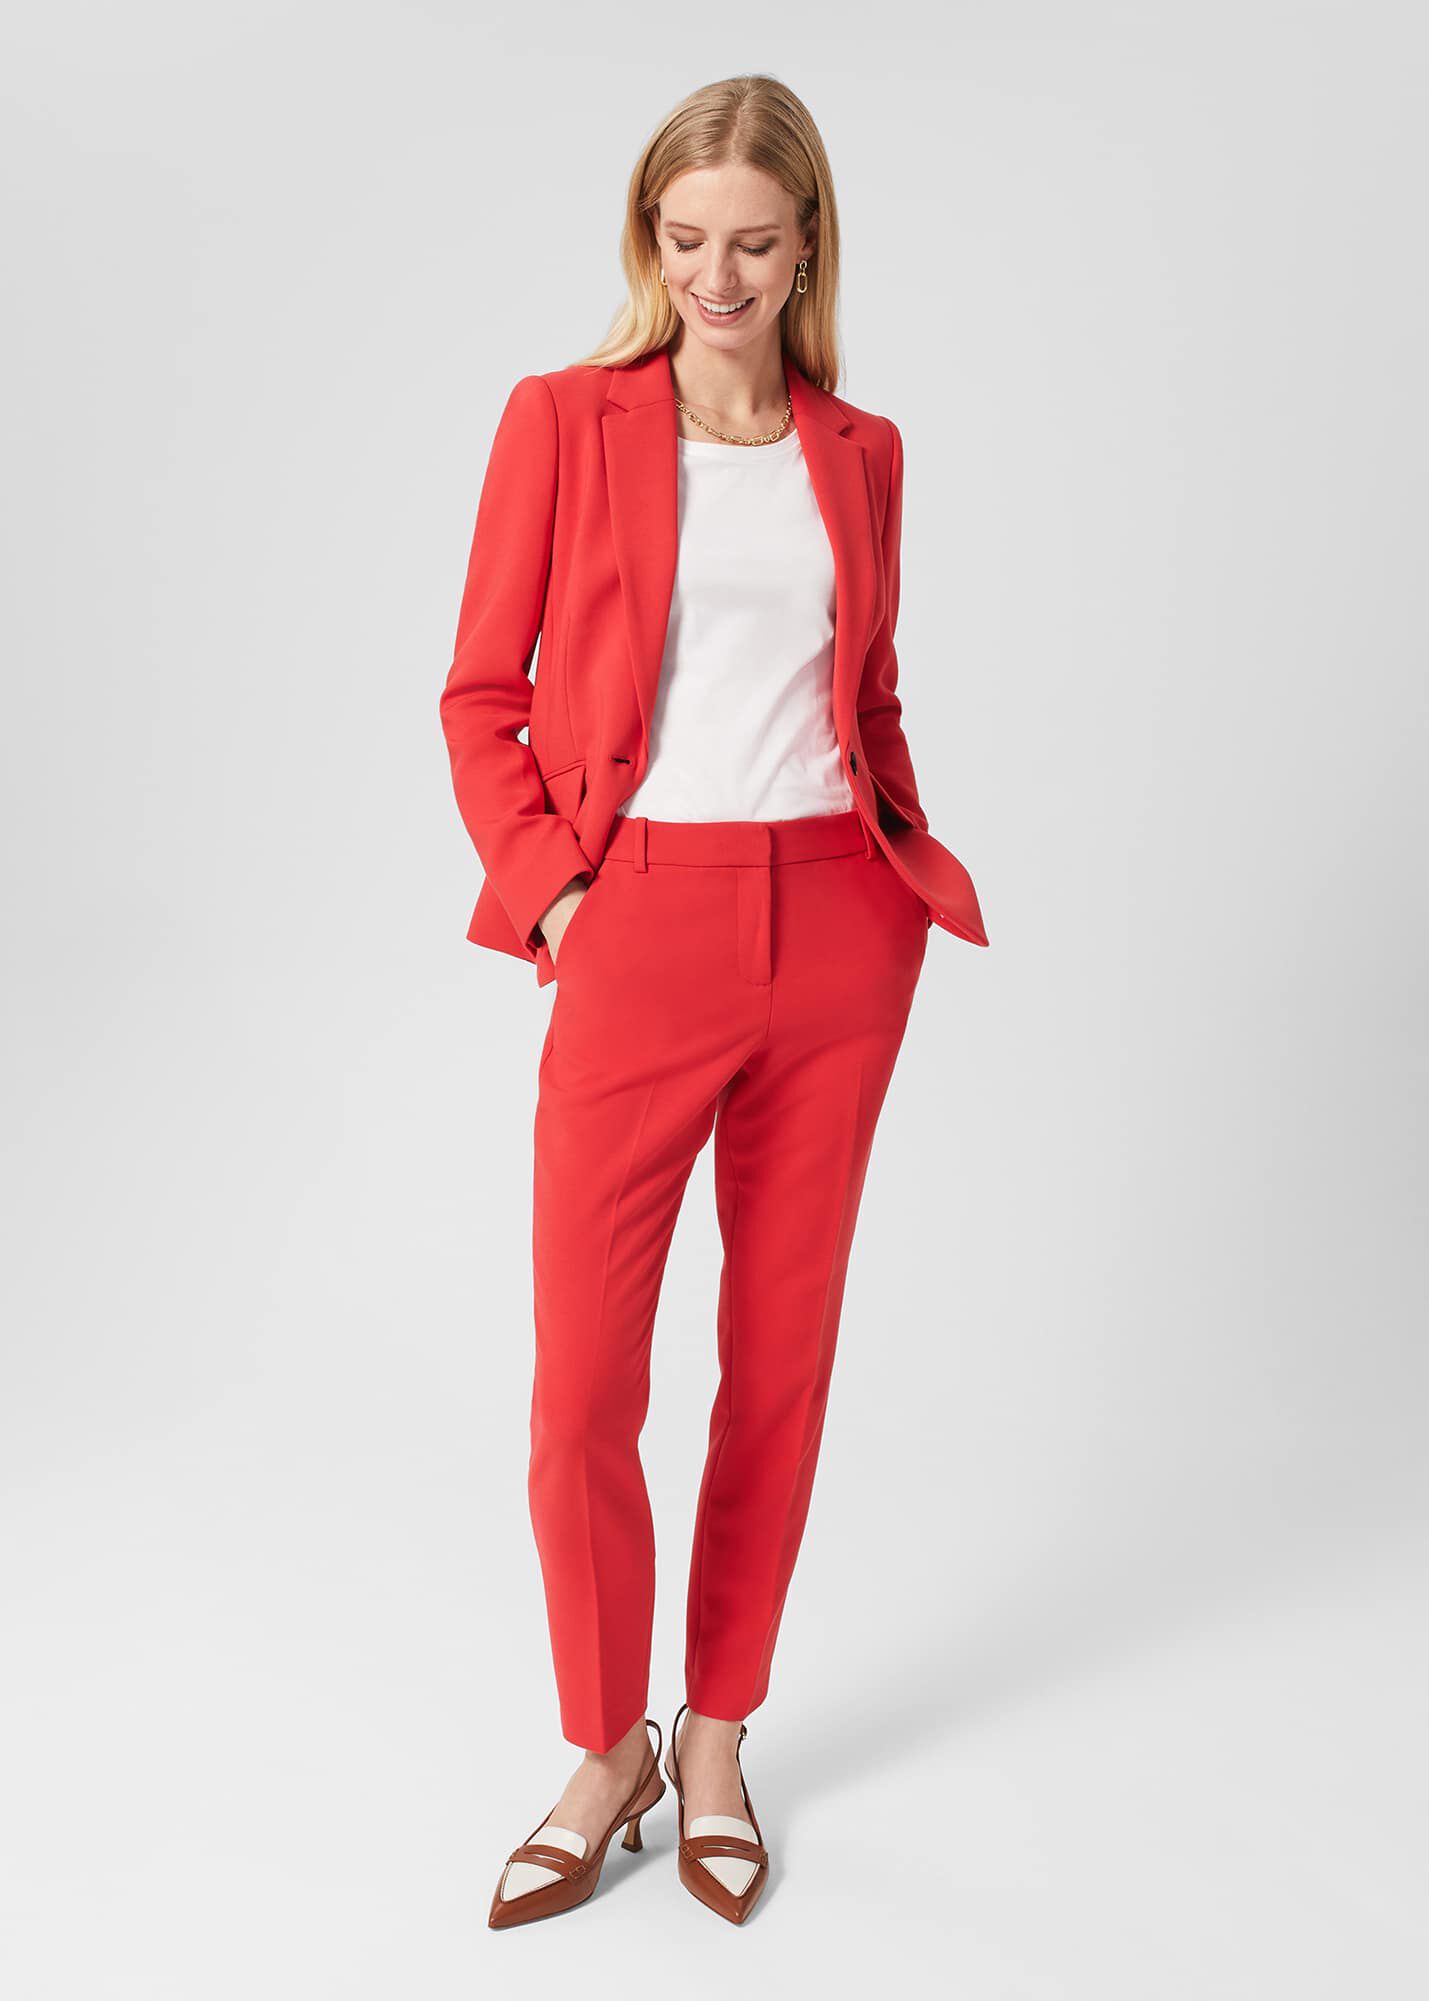 Hobbs Cassia Wool Blend Tailored Trousers Dusky Blue at John Lewis   Partners